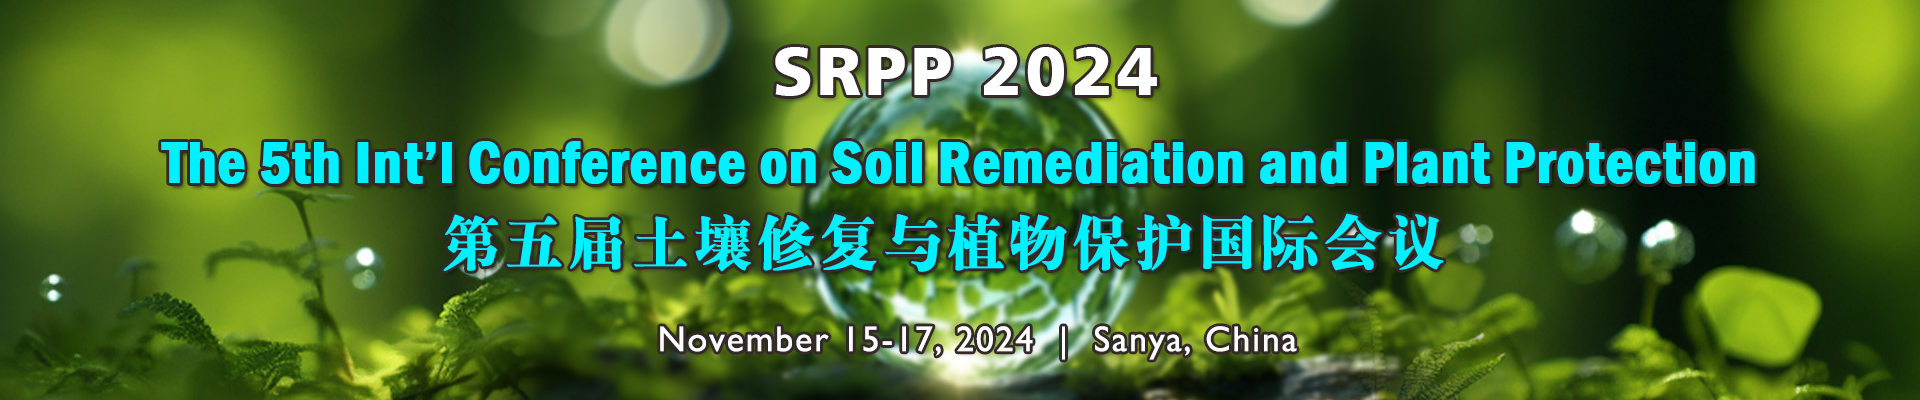 The 5th Int'l Conference on Soil Remediation and Plant Protection (SRPP 2024), Sanya, China